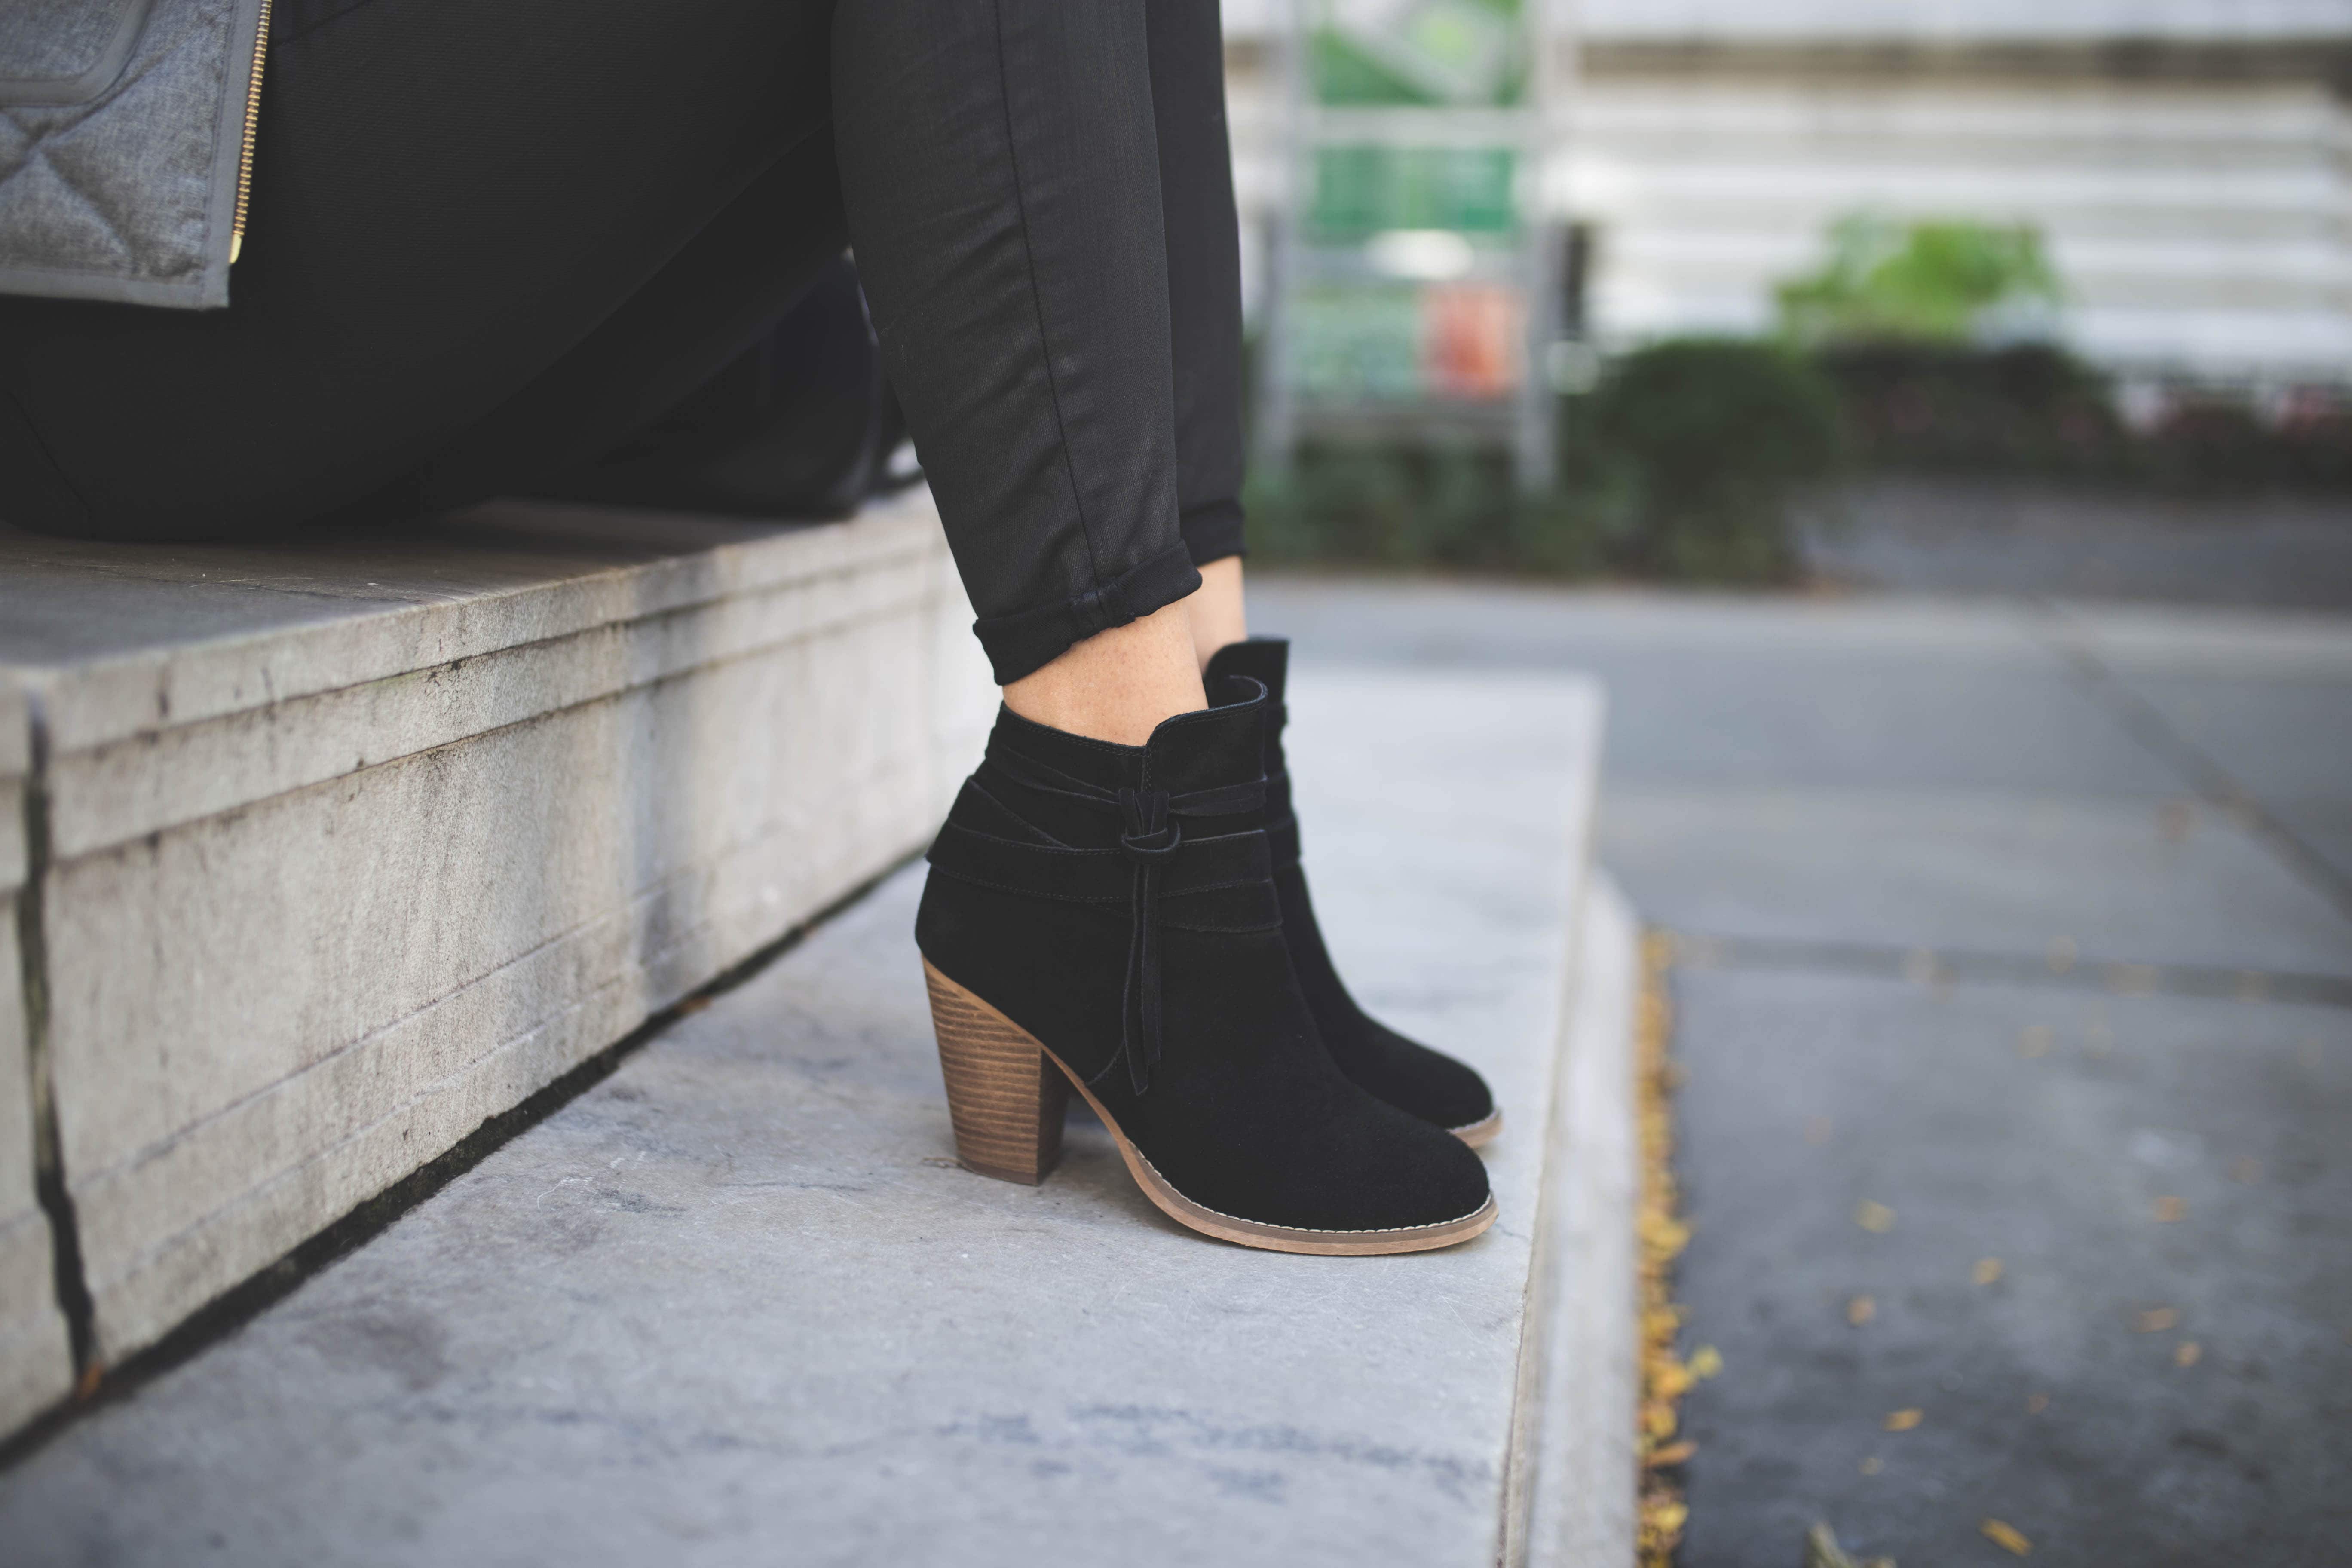 SUEDE ANKLE BOOTIES Styled Snapshots